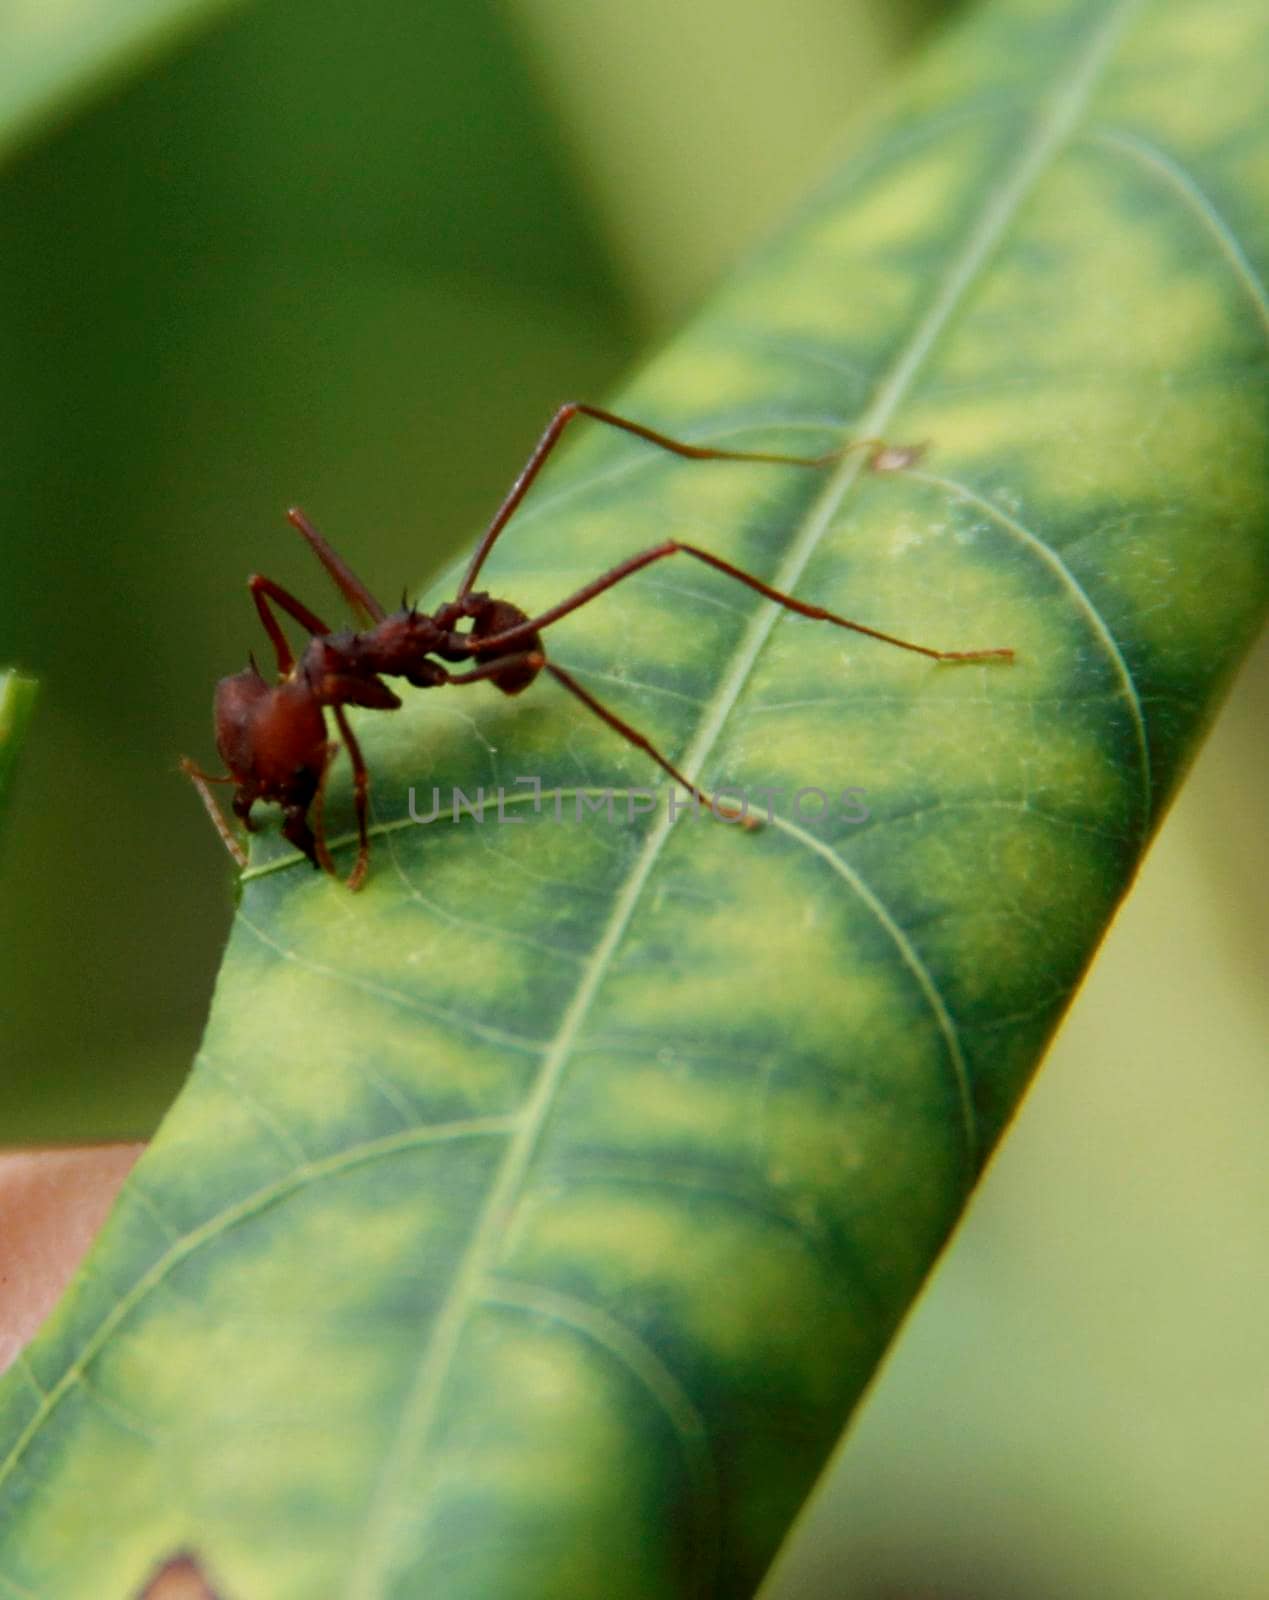 conde, bahia / brazil - july 26, 2014: ant cutter is seen in garden in the city of Conde.